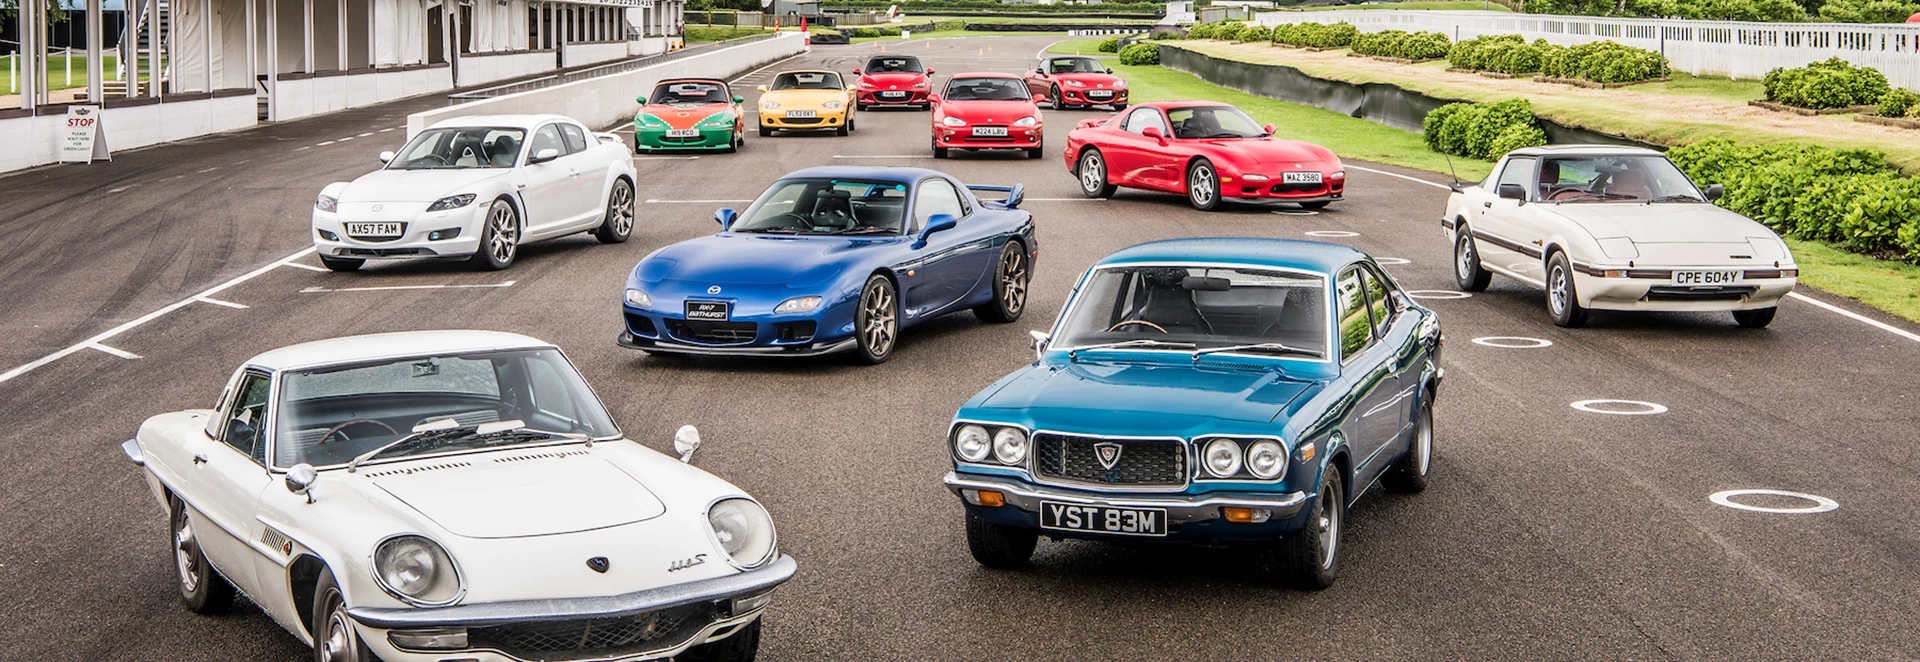 Mazda turns 100: 5 important cars from this innovative car maker 